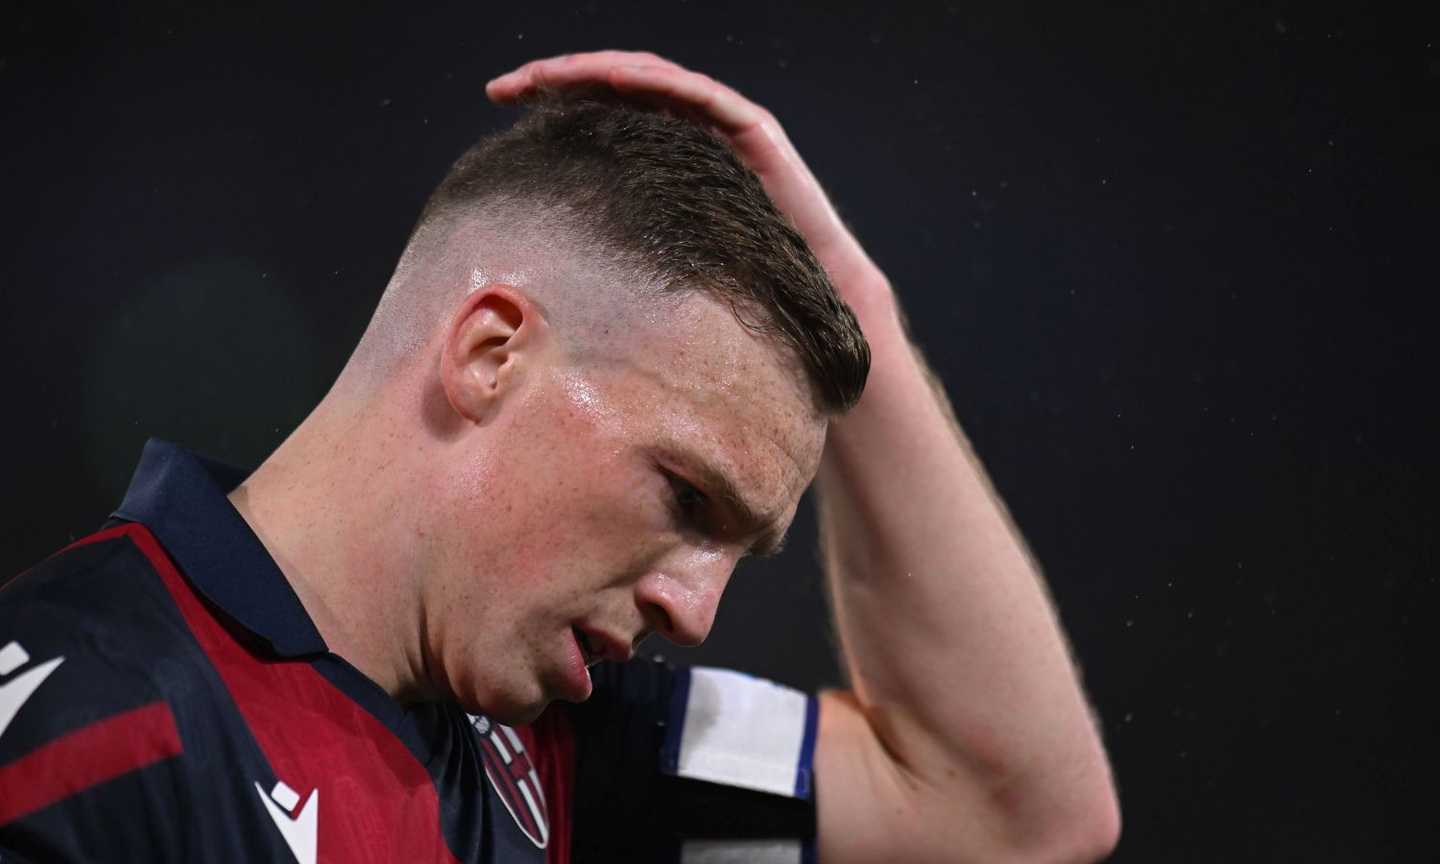 Bologna have been dealt a significant blow as Lewis Ferguson has been diagnosed with an ACL tear following a rough collision with an opponent.